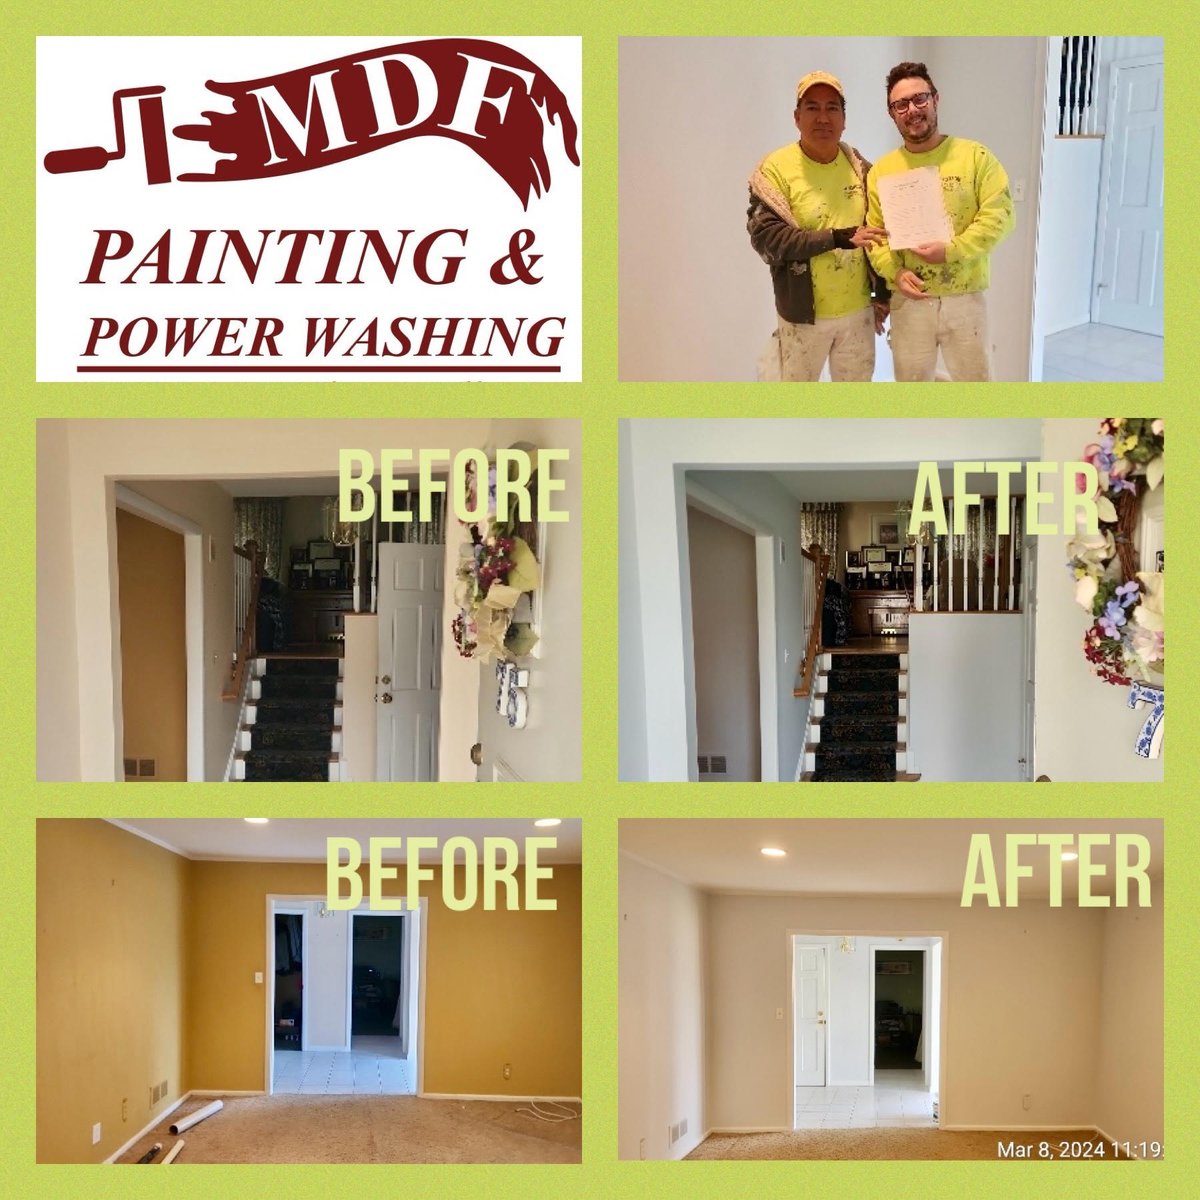 It was time for a color change! Here are some great before and after photos from the interior painting project we just finished for our Stamford, CT client! The client loves it, and we love that! #interiorpainting #freshnewlook #beforeandafter #happycustomer #ctpainters